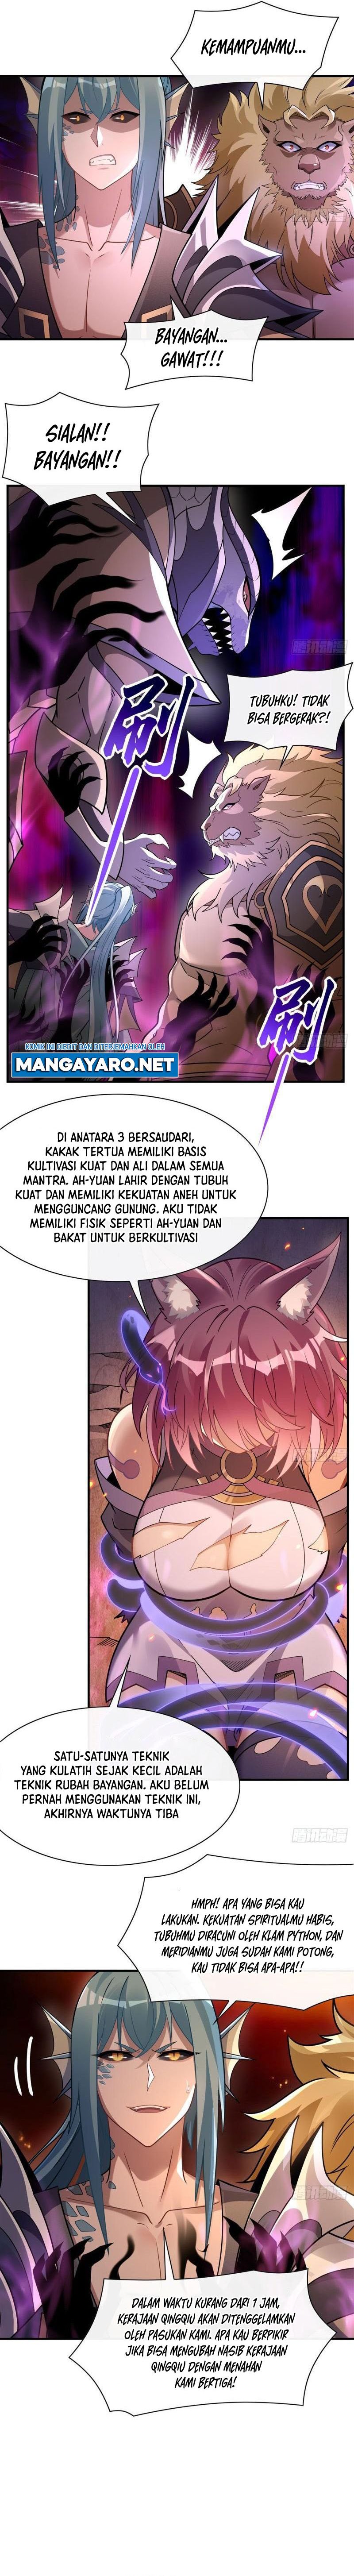 Dilarang COPAS - situs resmi www.mangacanblog.com - Komik my female apprentices are all big shots from the future 175 - chapter 175 176 Indonesia my female apprentices are all big shots from the future 175 - chapter 175 Terbaru 3|Baca Manga Komik Indonesia|Mangacan